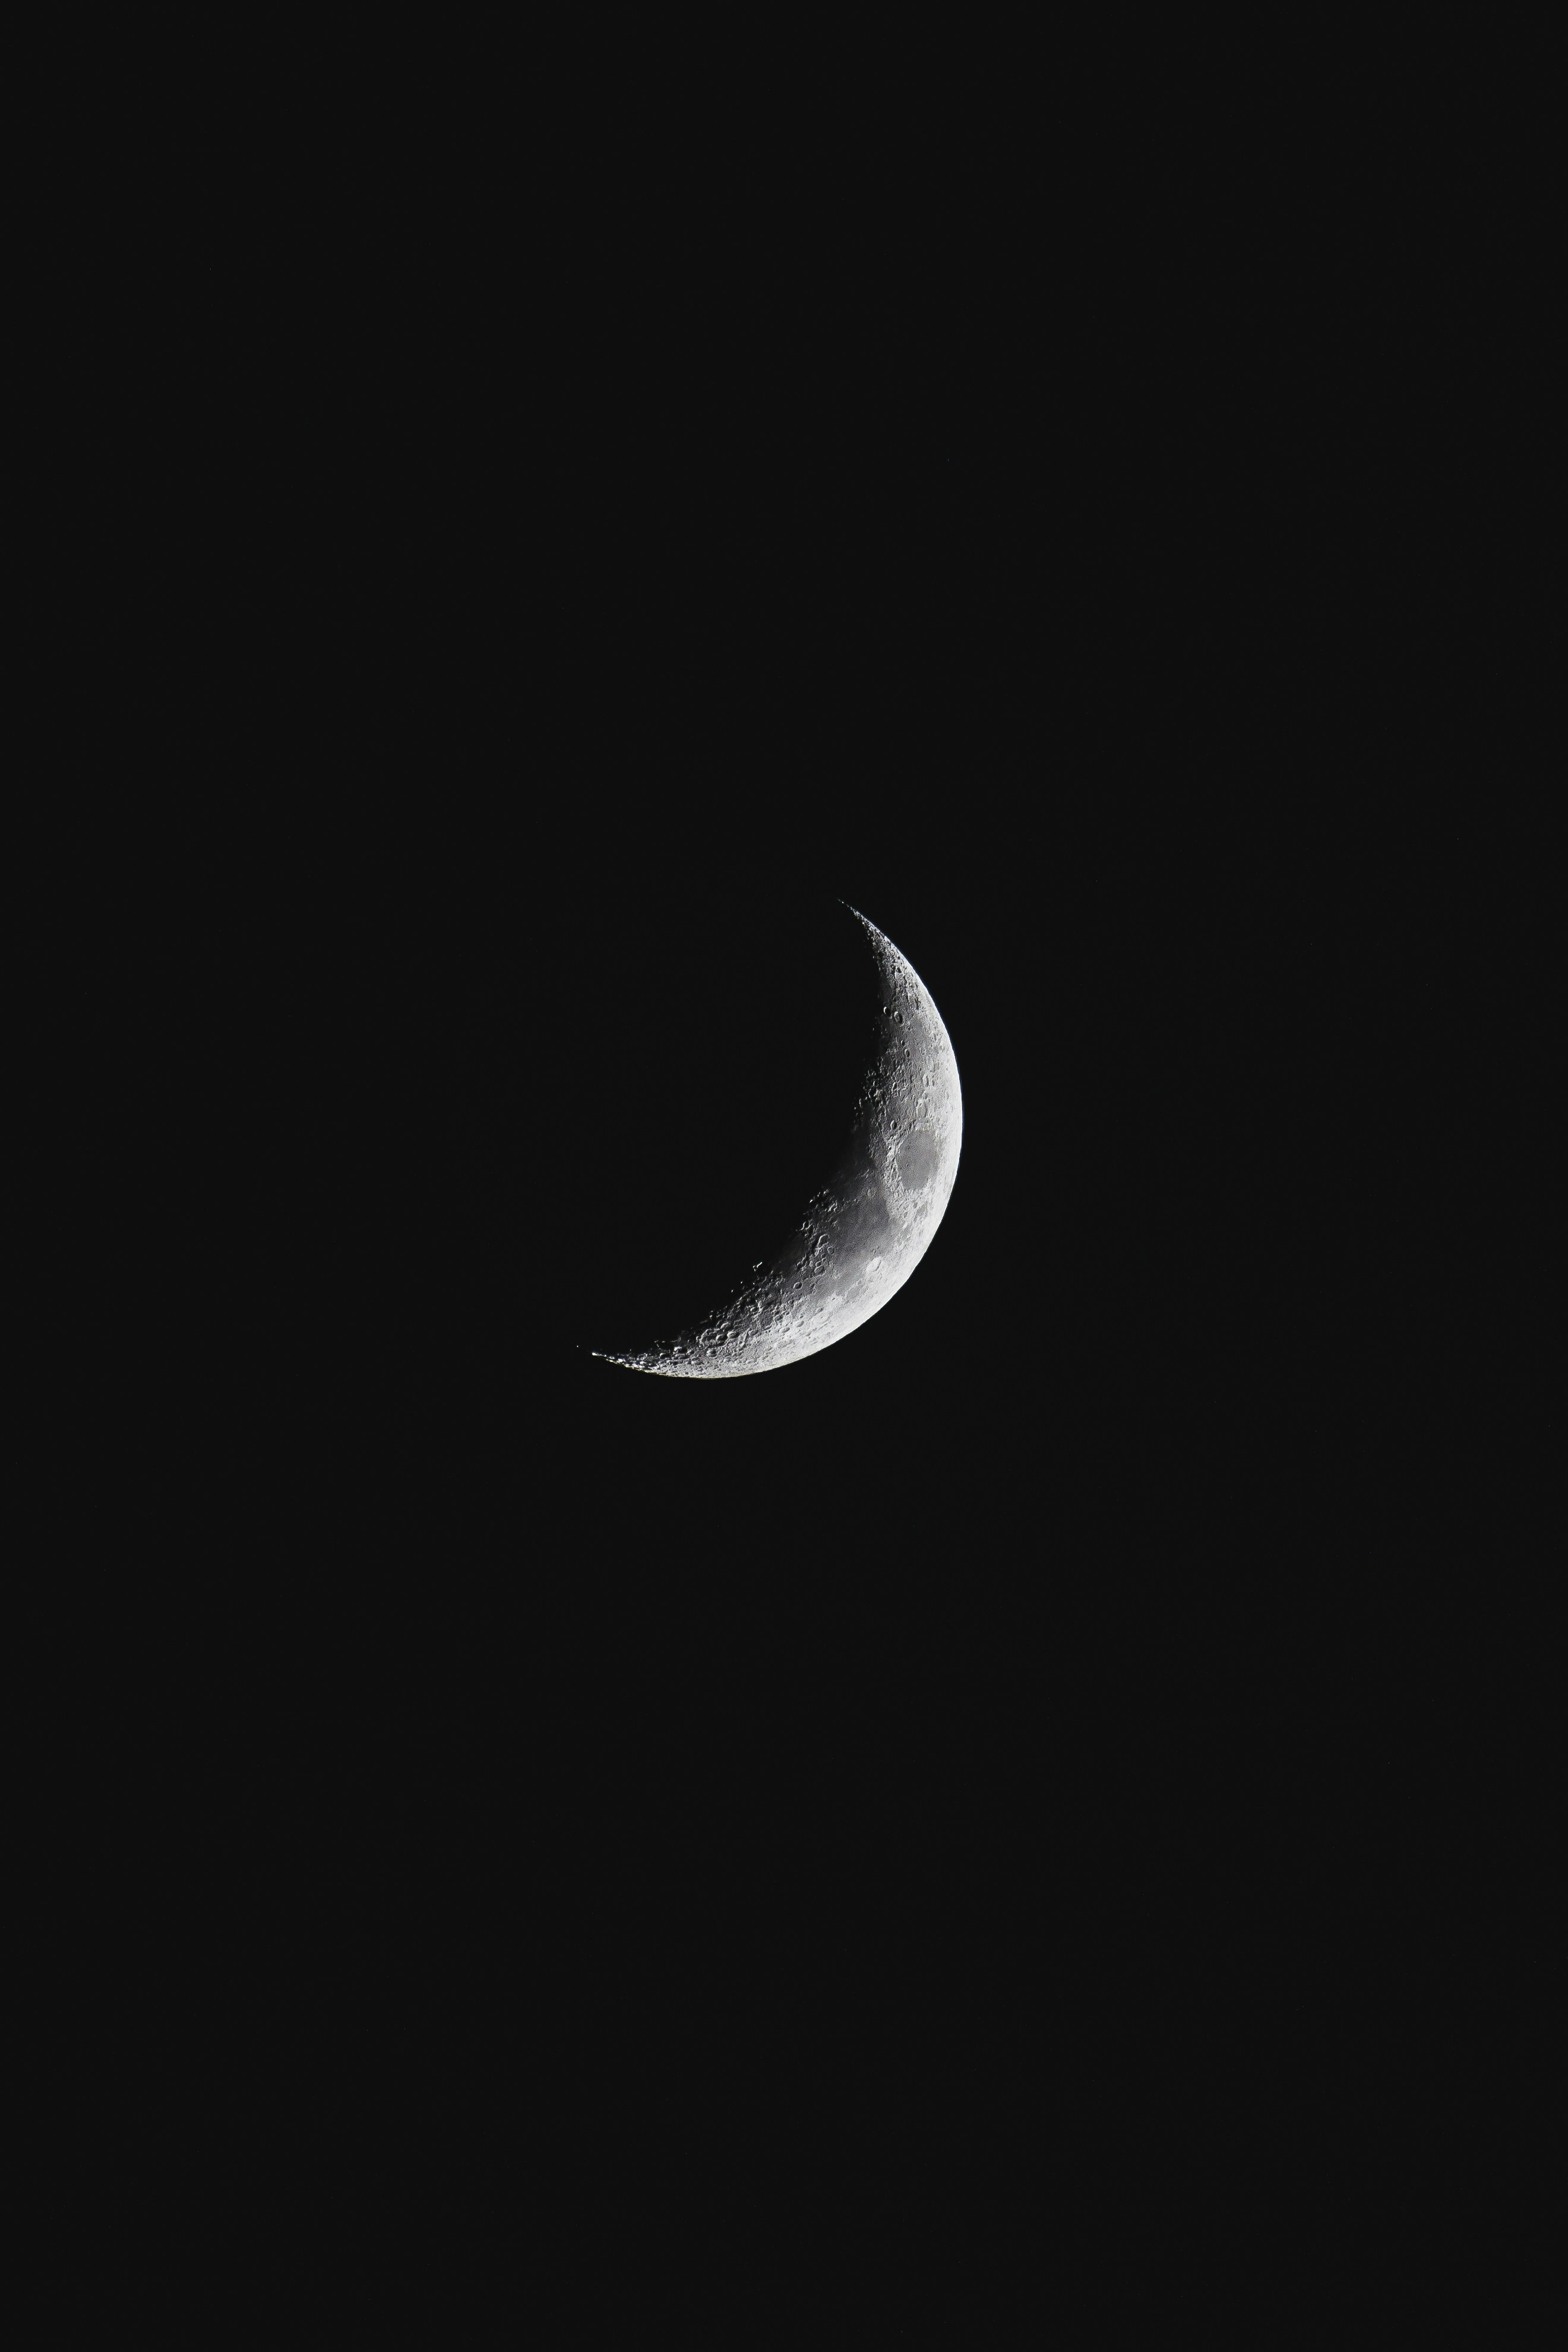 Half moon | Check out my Instagram - @WithLuke⠀ If you use my images and want to support me as a photographer any donations however small would be appreciated! Paypal - https://bit.ly/3dX4x1Y